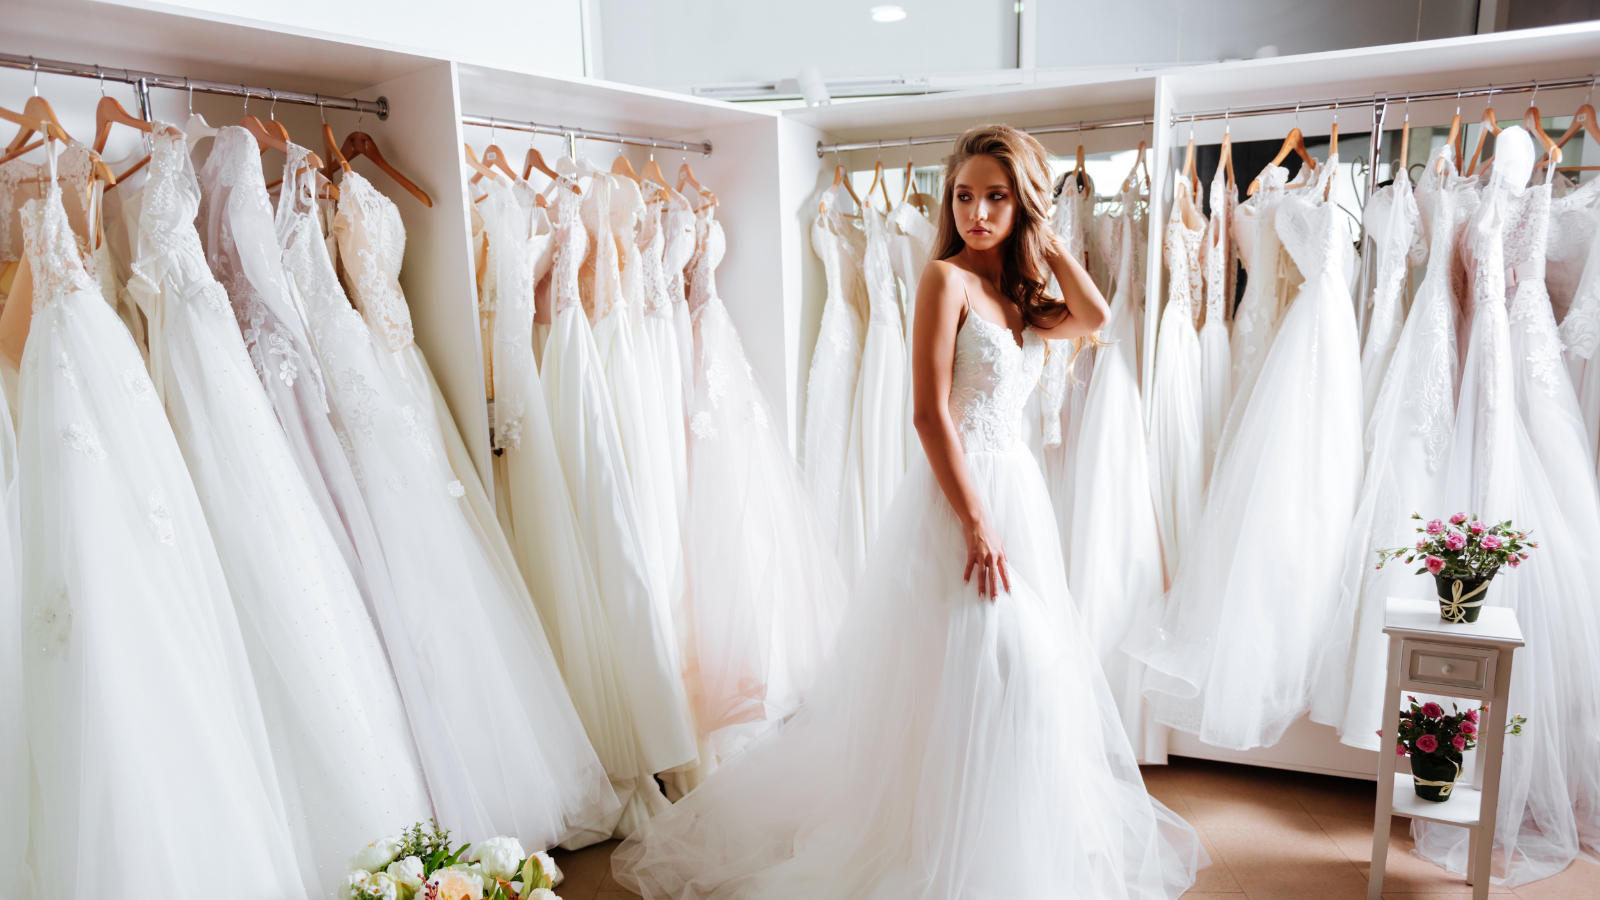 The Bride's Guide To Picking The Perfect Wedding Dress